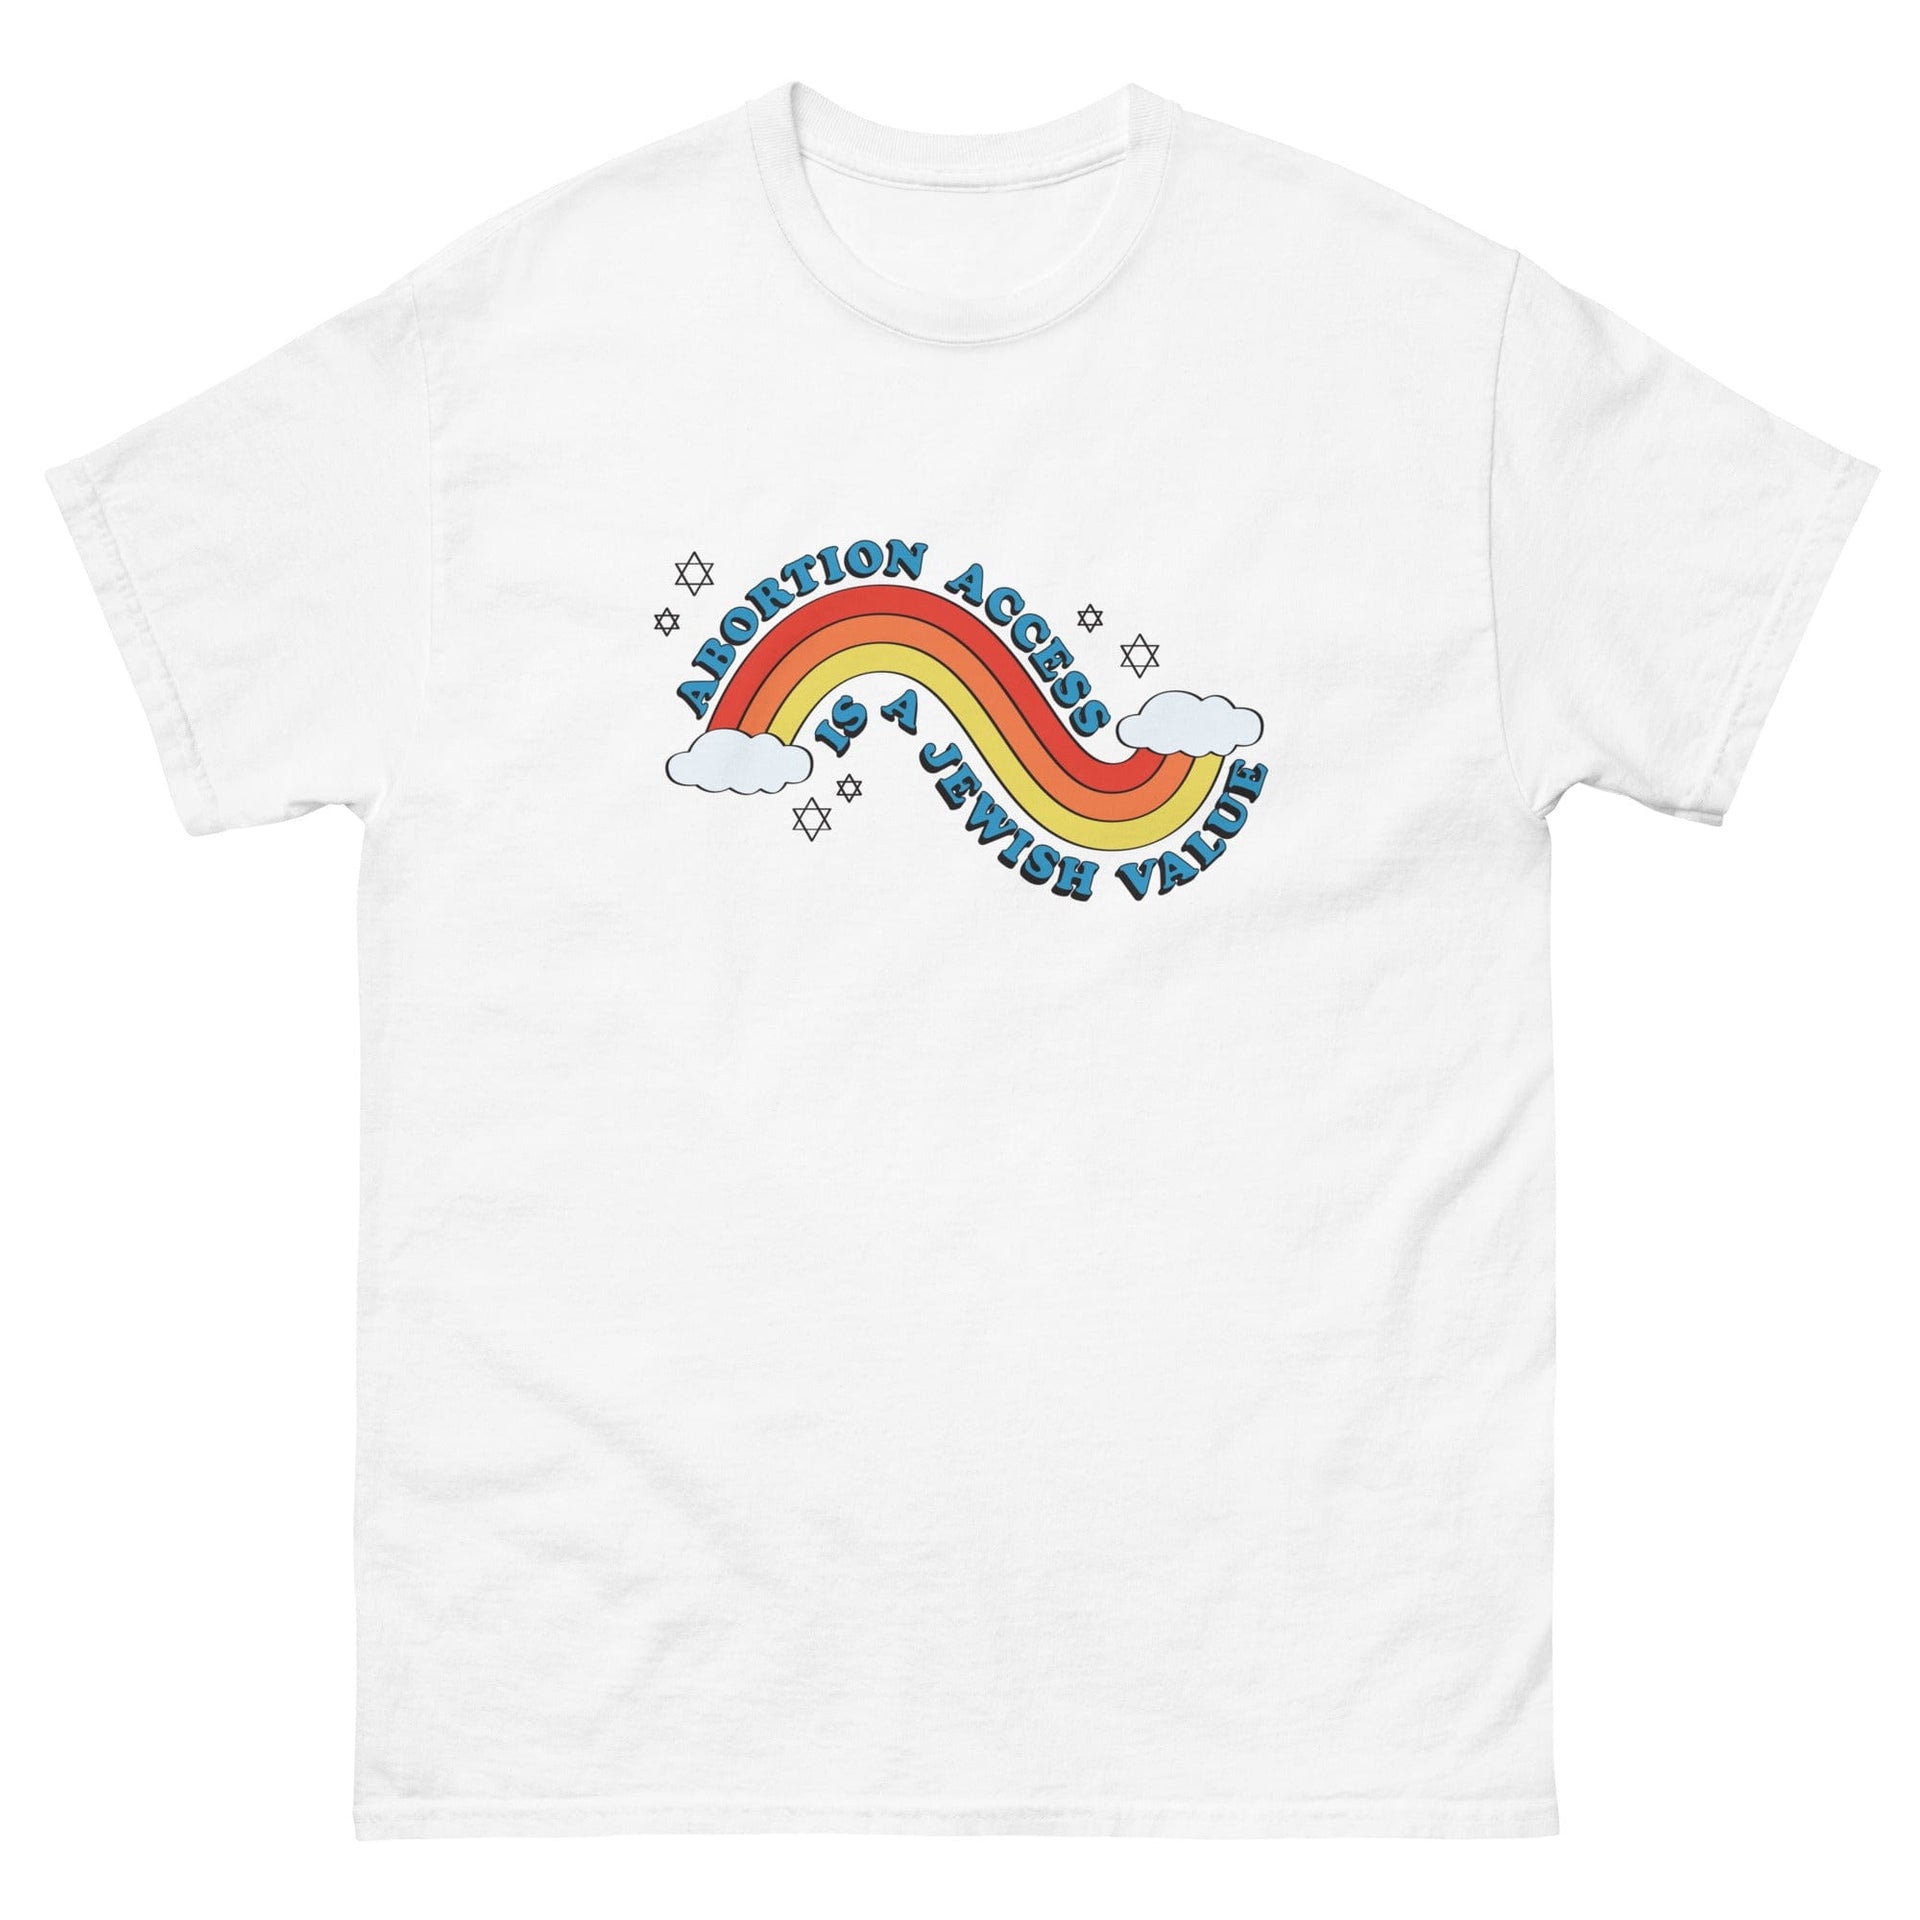 ModernTribe T-Shirts White / S Abortion Access is a Jewish Value T-Shirt - $18 Per Shirt Goes to NNAF